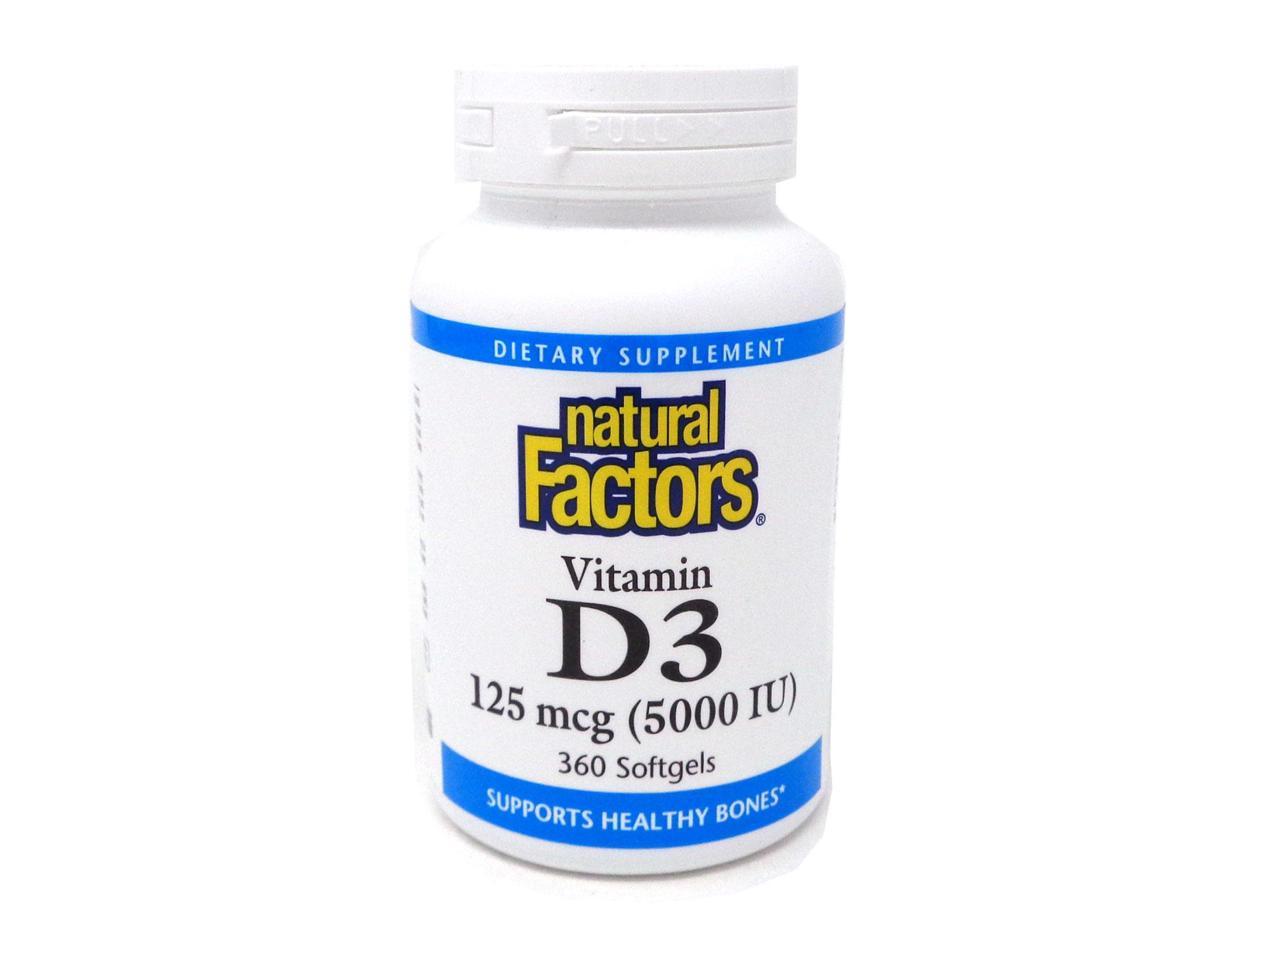 how many units is 5 mcg of vitamin d